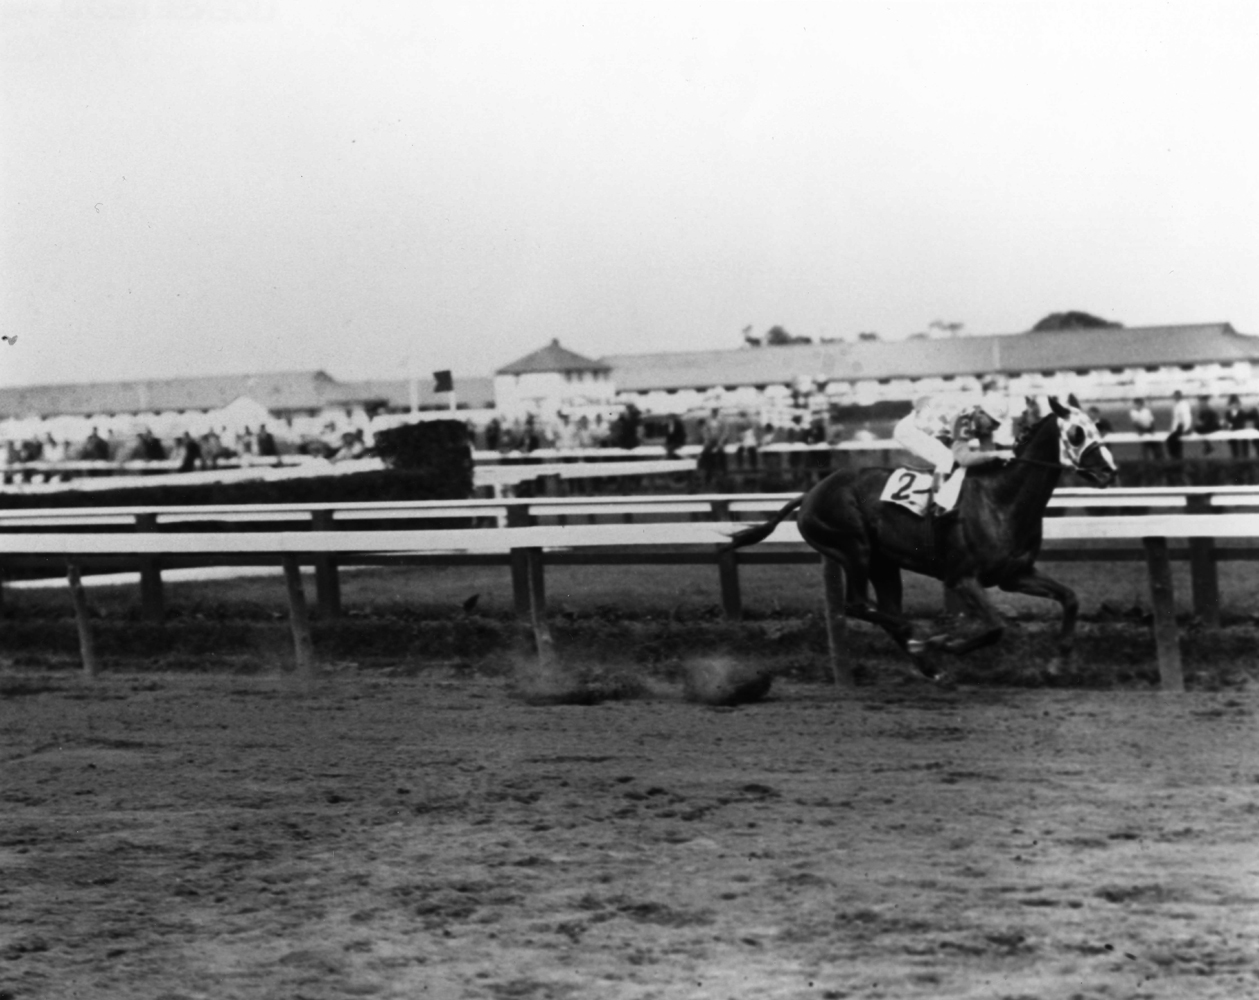 Discovery (John Bejshak up) winning the 1935 Brooklyn Handicap at Aqueduct (Keeneland Library Cook Collection/Museum Collection)